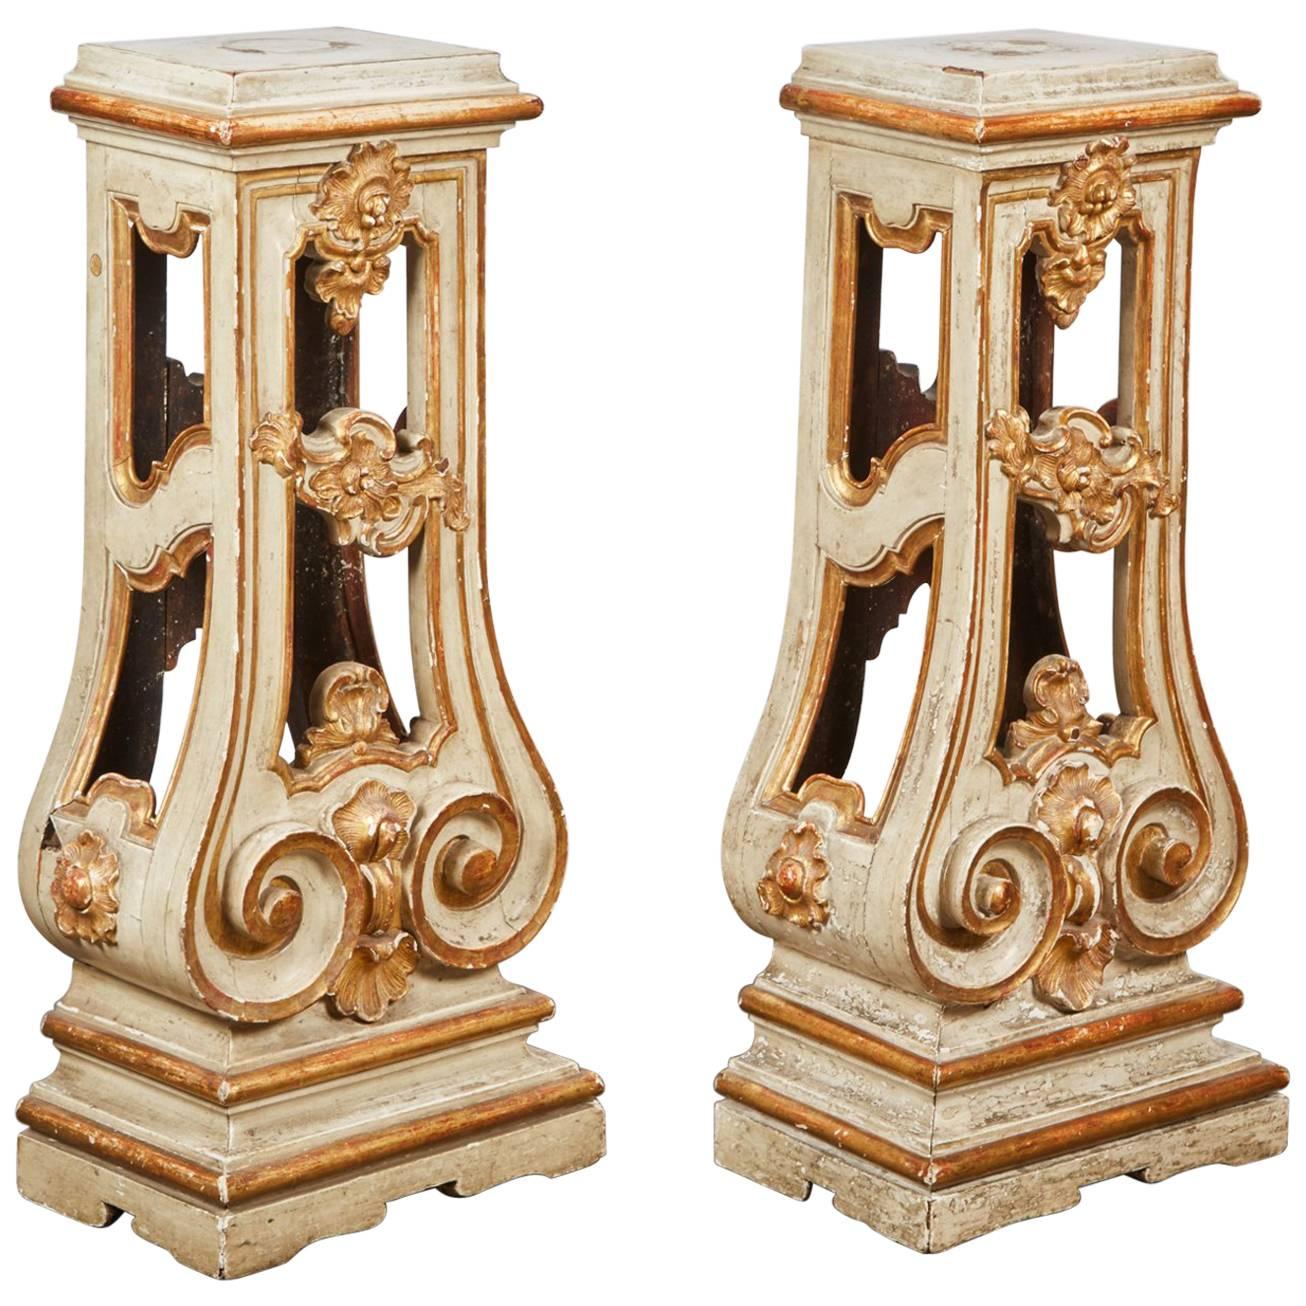 Pair of 18th Century Italian Rococo Cream Painted and Parcel Gilt-Pedestal